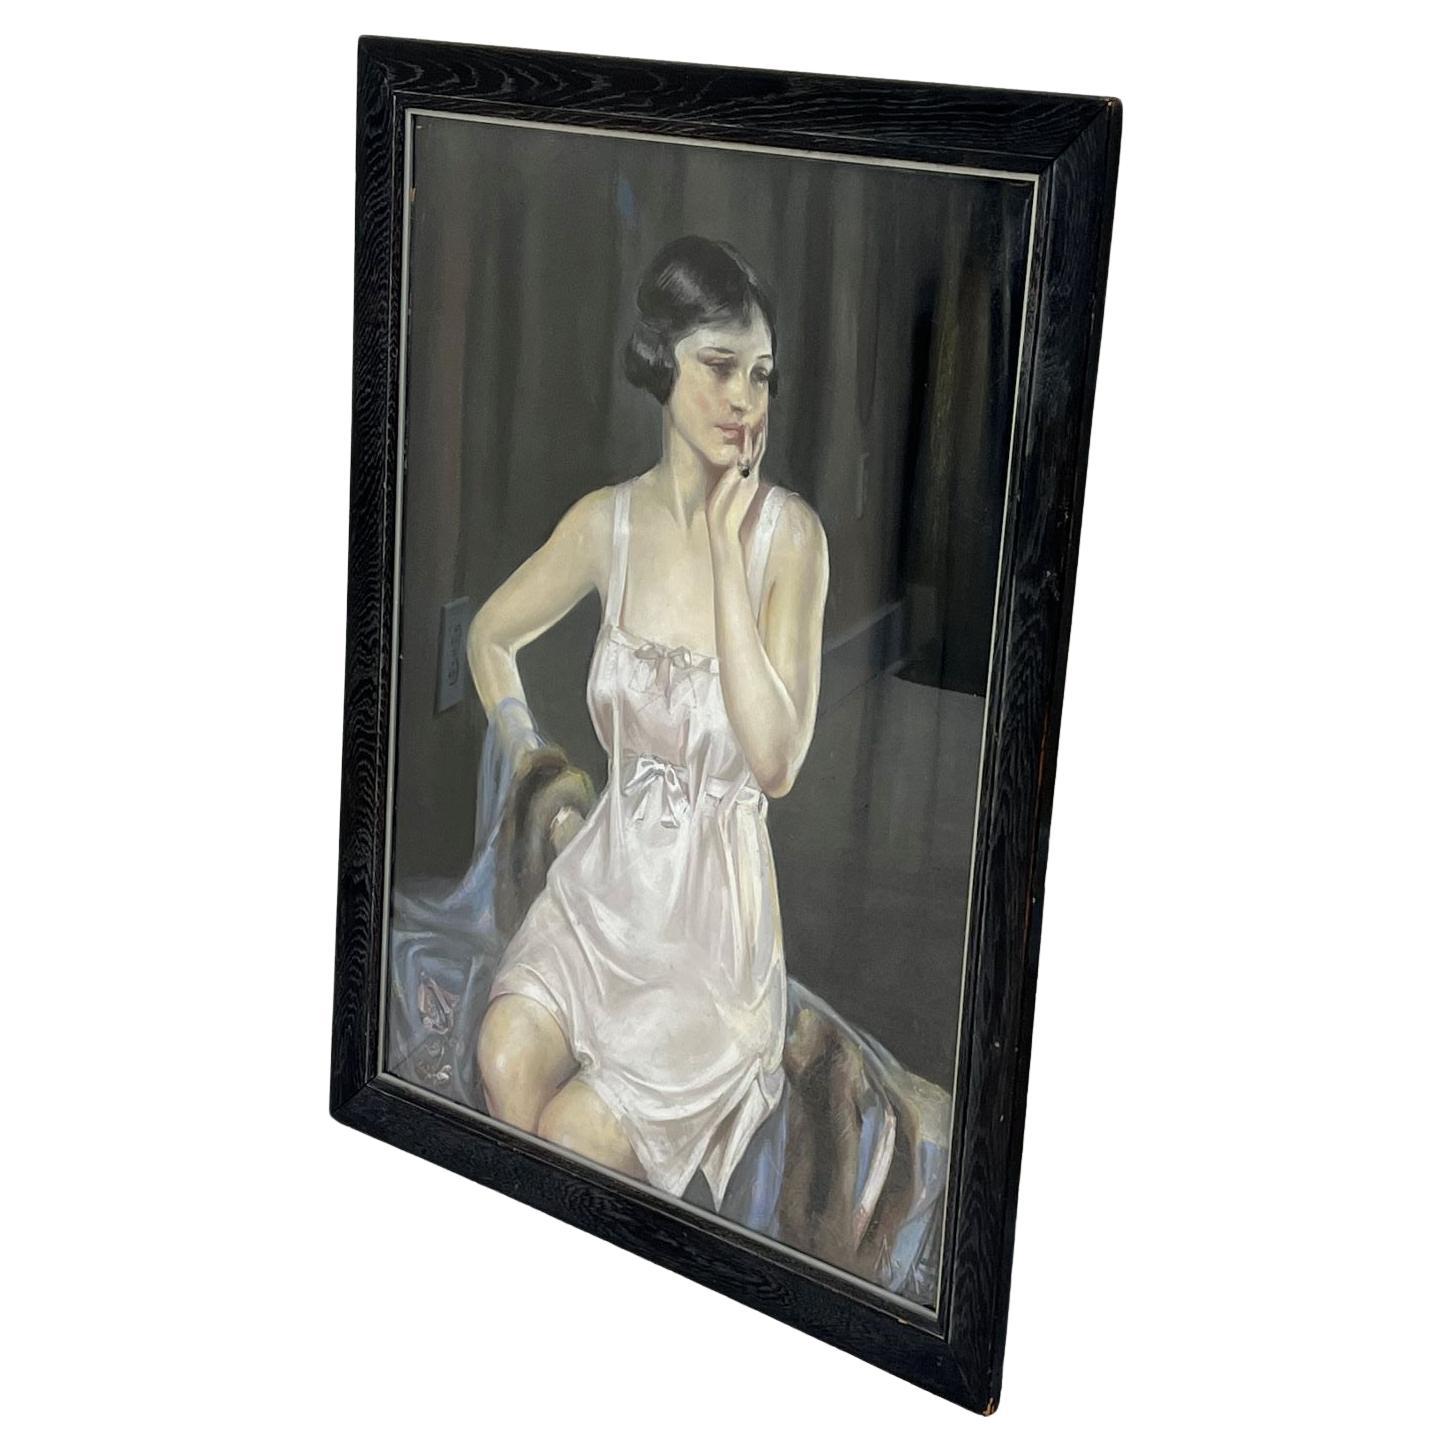  Exceptional and rare Neysa McMein illustration on board of a woman in lingerie C.1920’s. Signed on bottom left corner. Some edges showing a little wear. Dimensions picture 27.5 inches by 37.5 inches. Frame dimensions 32 inches by 42 inches.

      